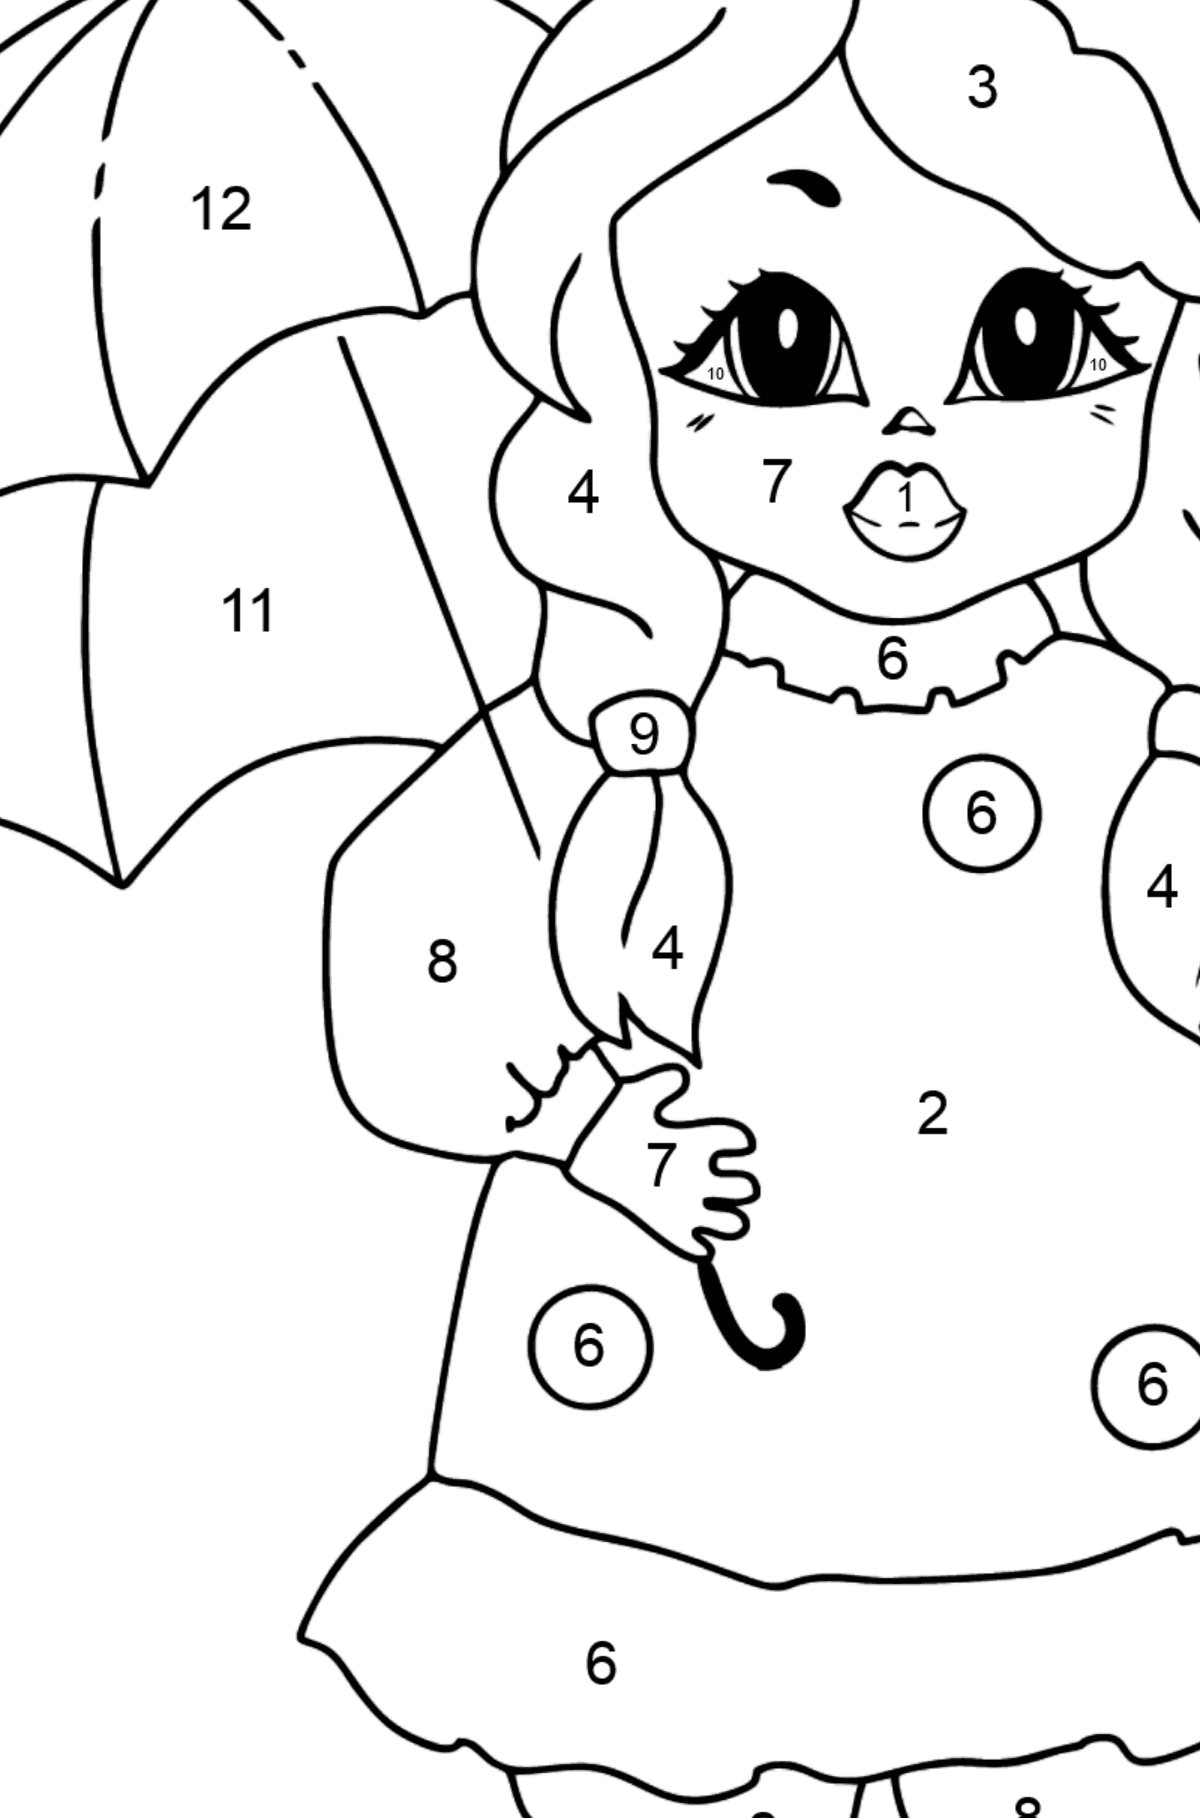 Funny princess coloring page - Coloring by Numbers for Kids